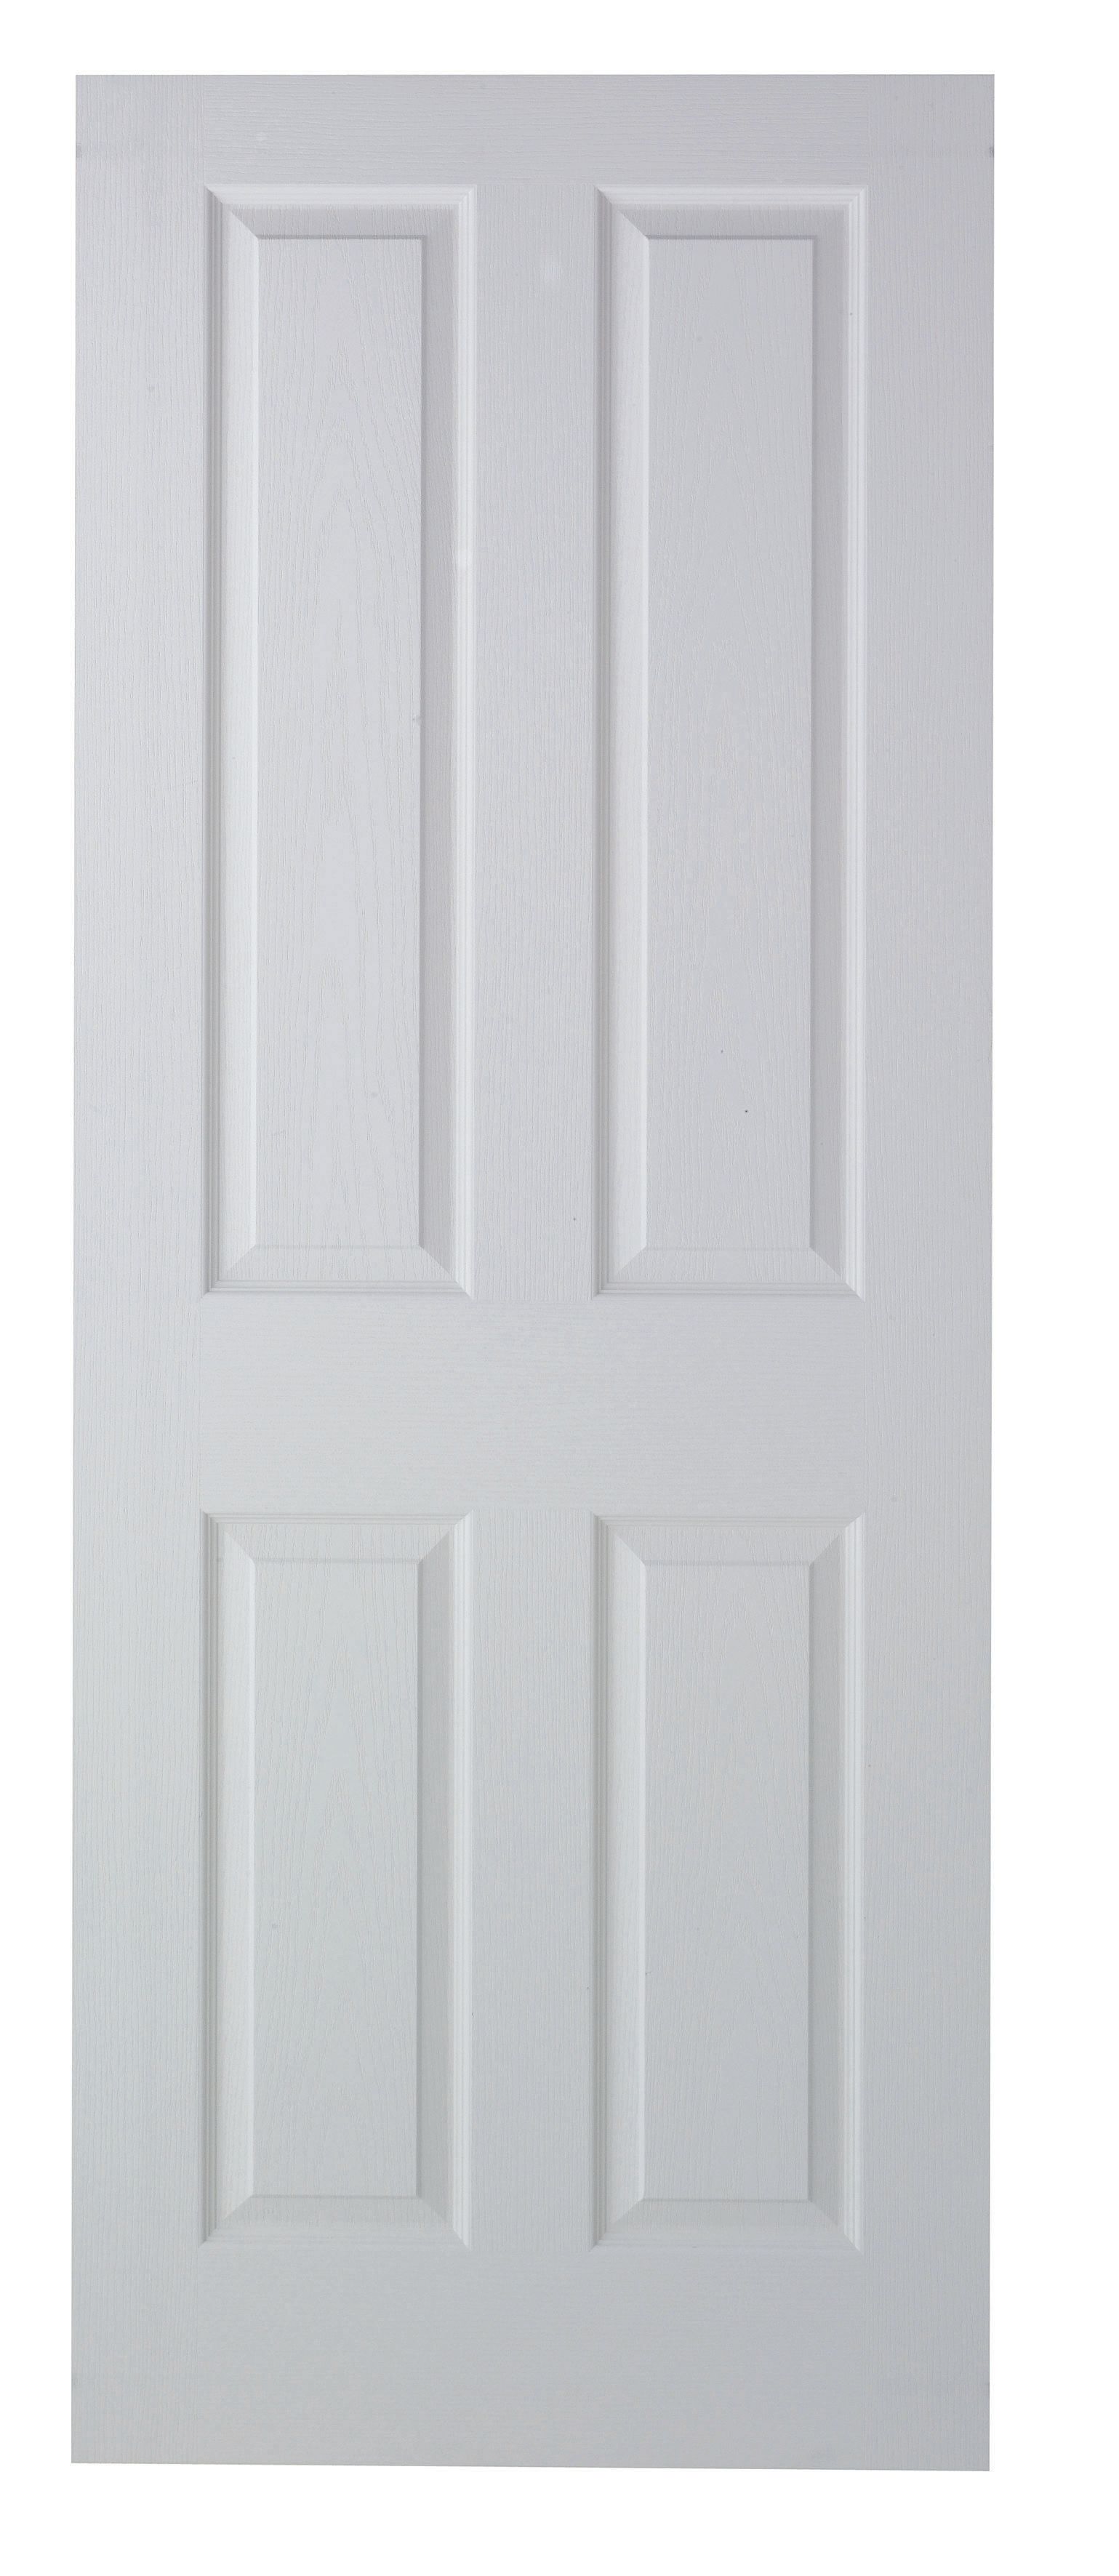 Wickes Stirling White Grained Moulded 4 Panel Internal Fire Door - 2040mm x 726mm